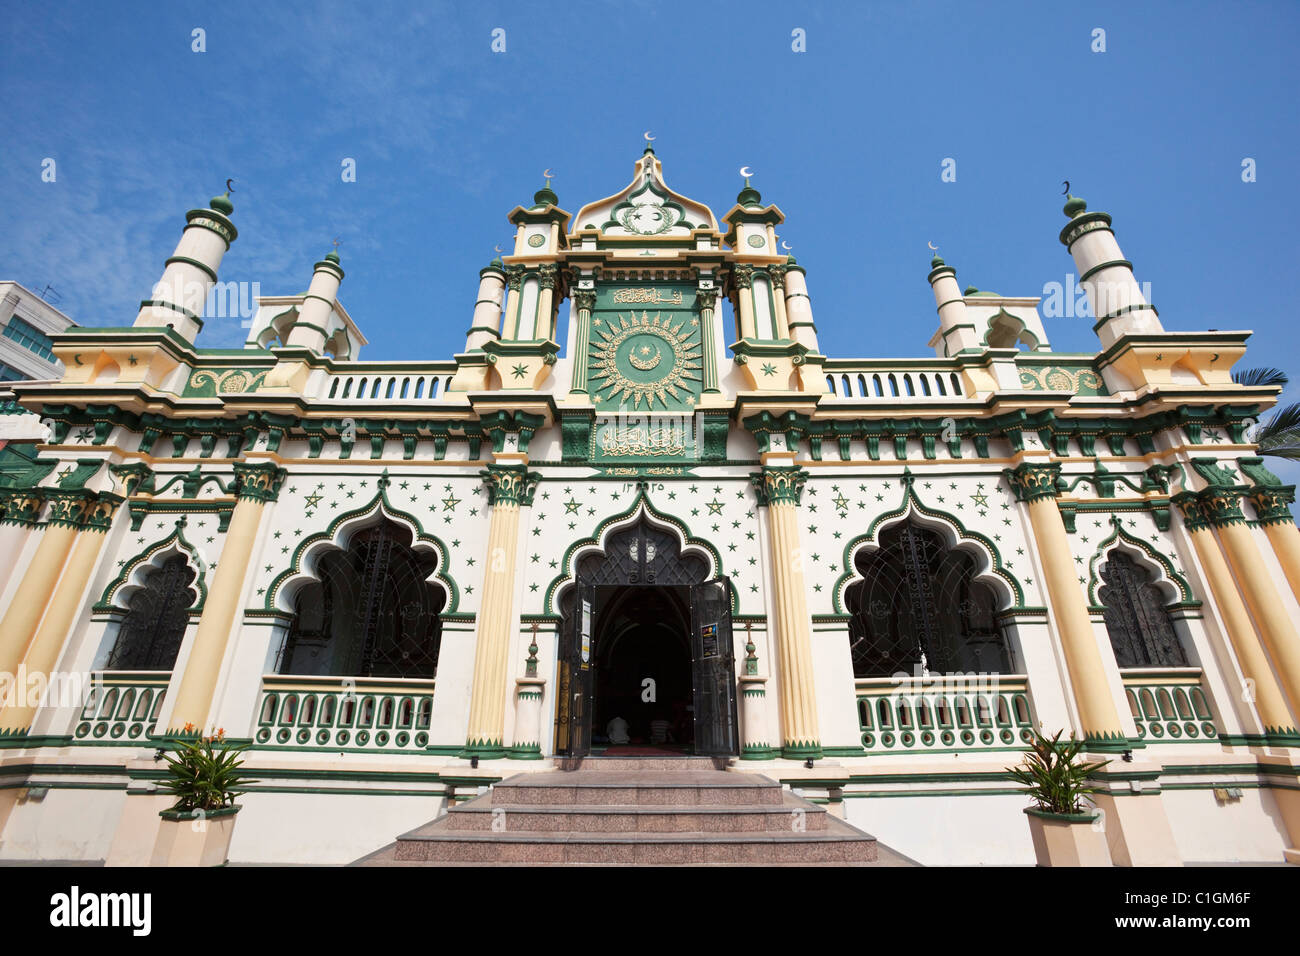 Islamic architecture of the Abdul Gaffoor Mosque.  Little India, Singapore Stock Photo